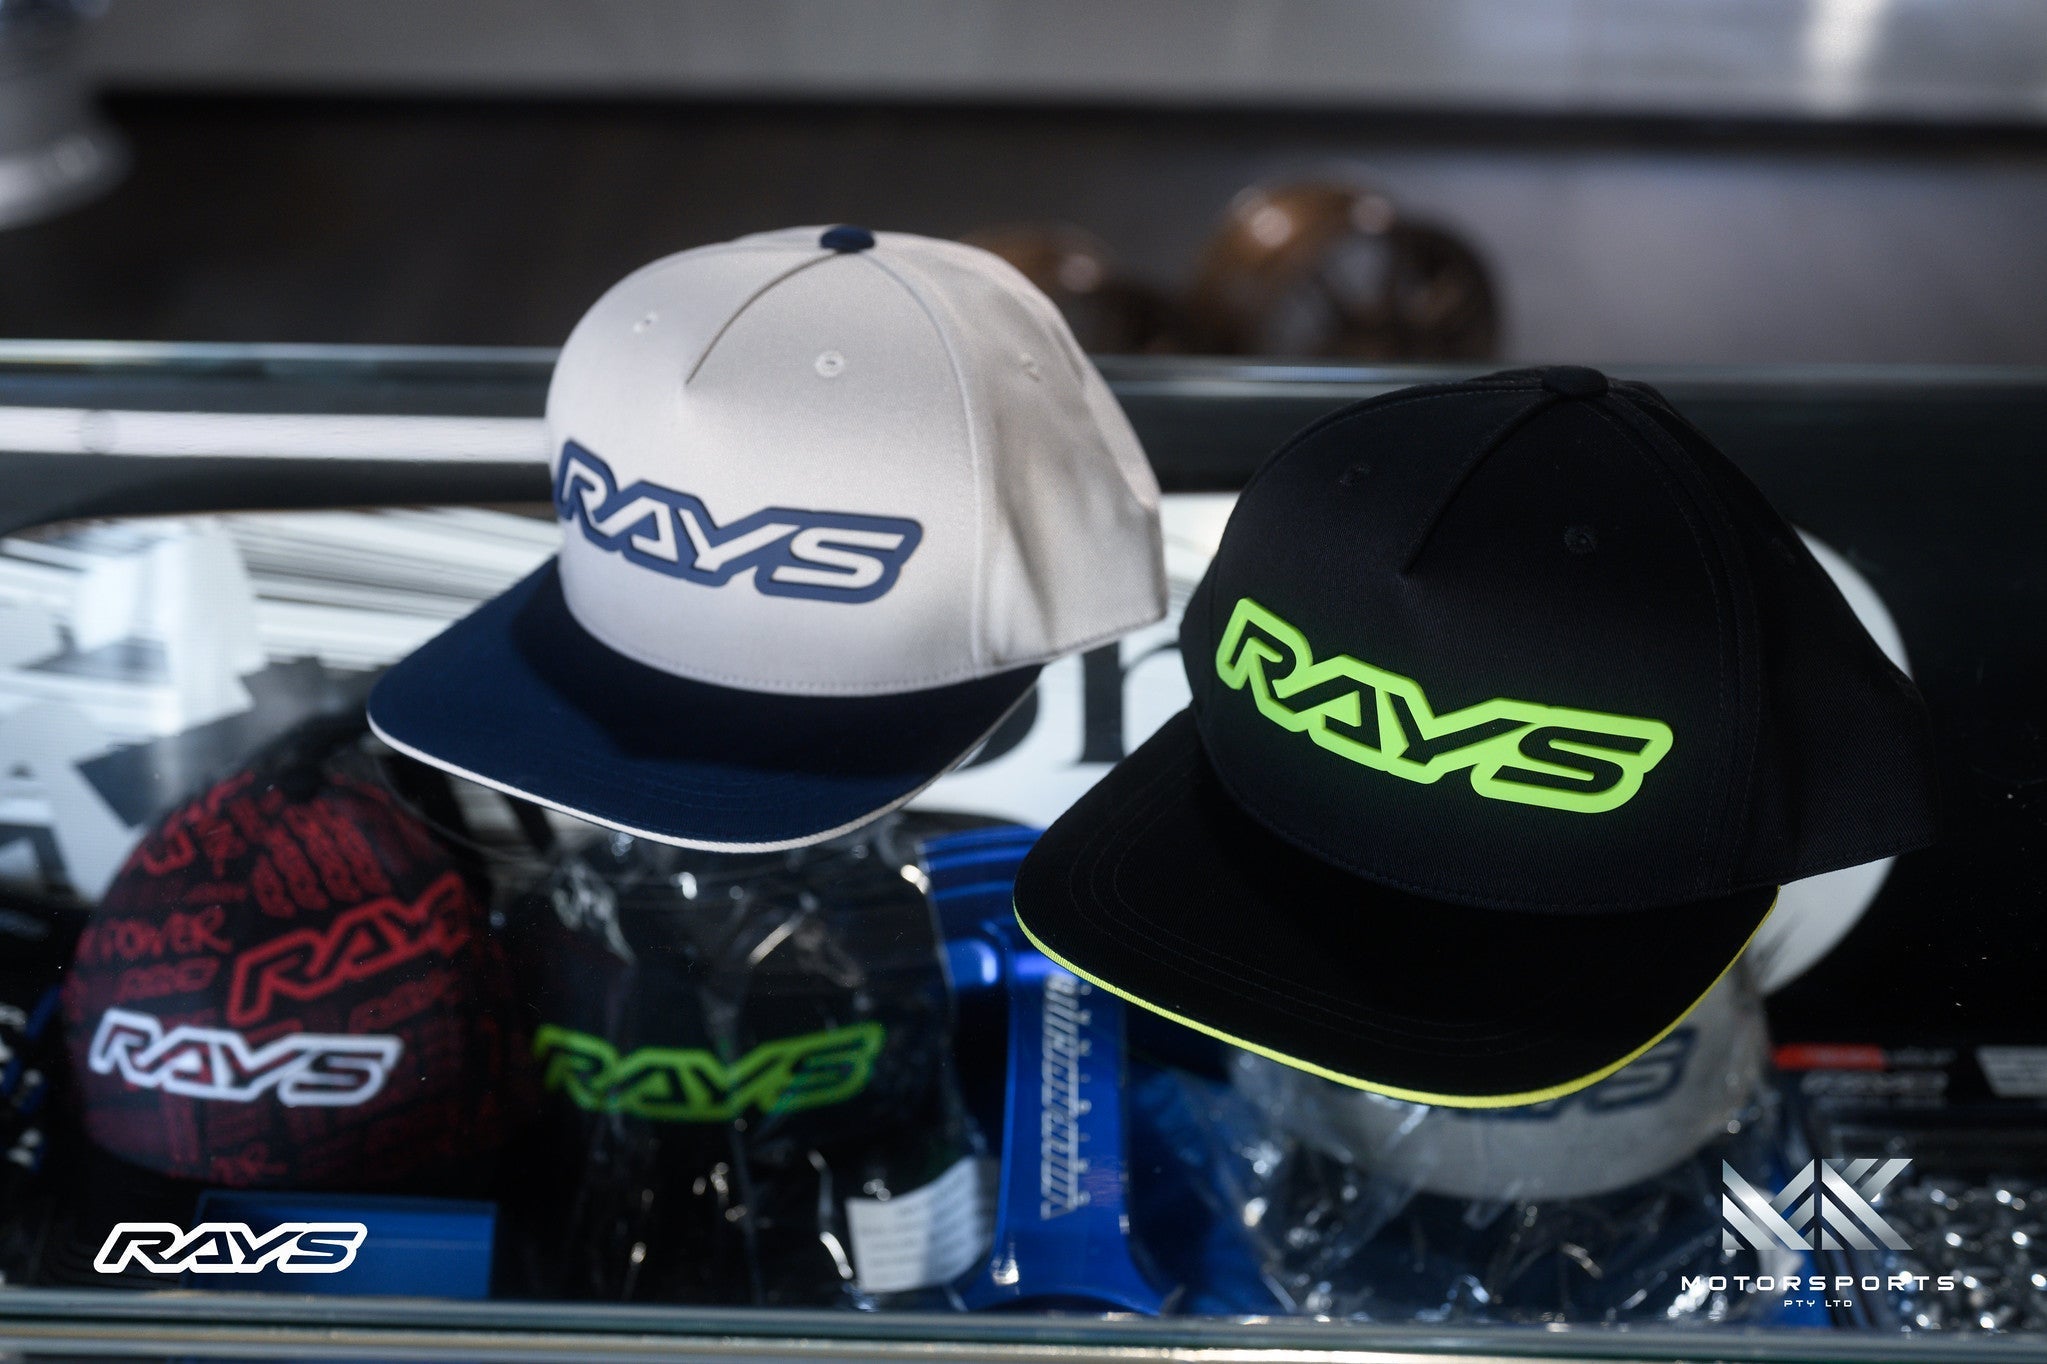 RAYS Official Cap 23S - Premium Merchandise from Merch - From just $75! Shop now at MK MOTORSPORTS